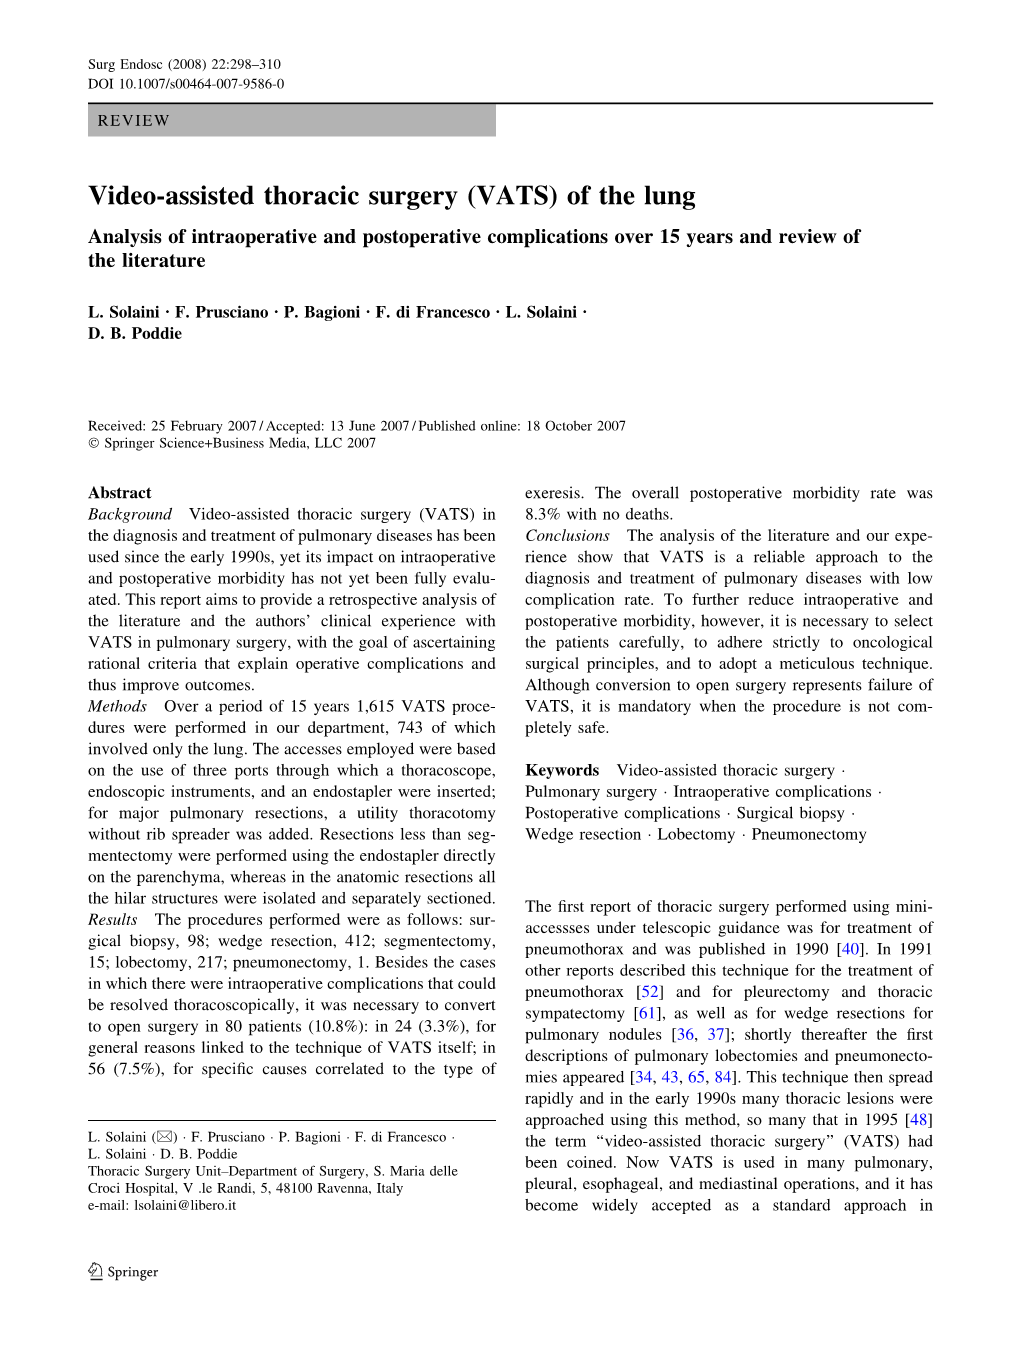 Video-Assisted Thoracic Surgery (VATS) of the Lung Analysis of Intraoperative and Postoperative Complications Over 15 Years and Review of the Literature